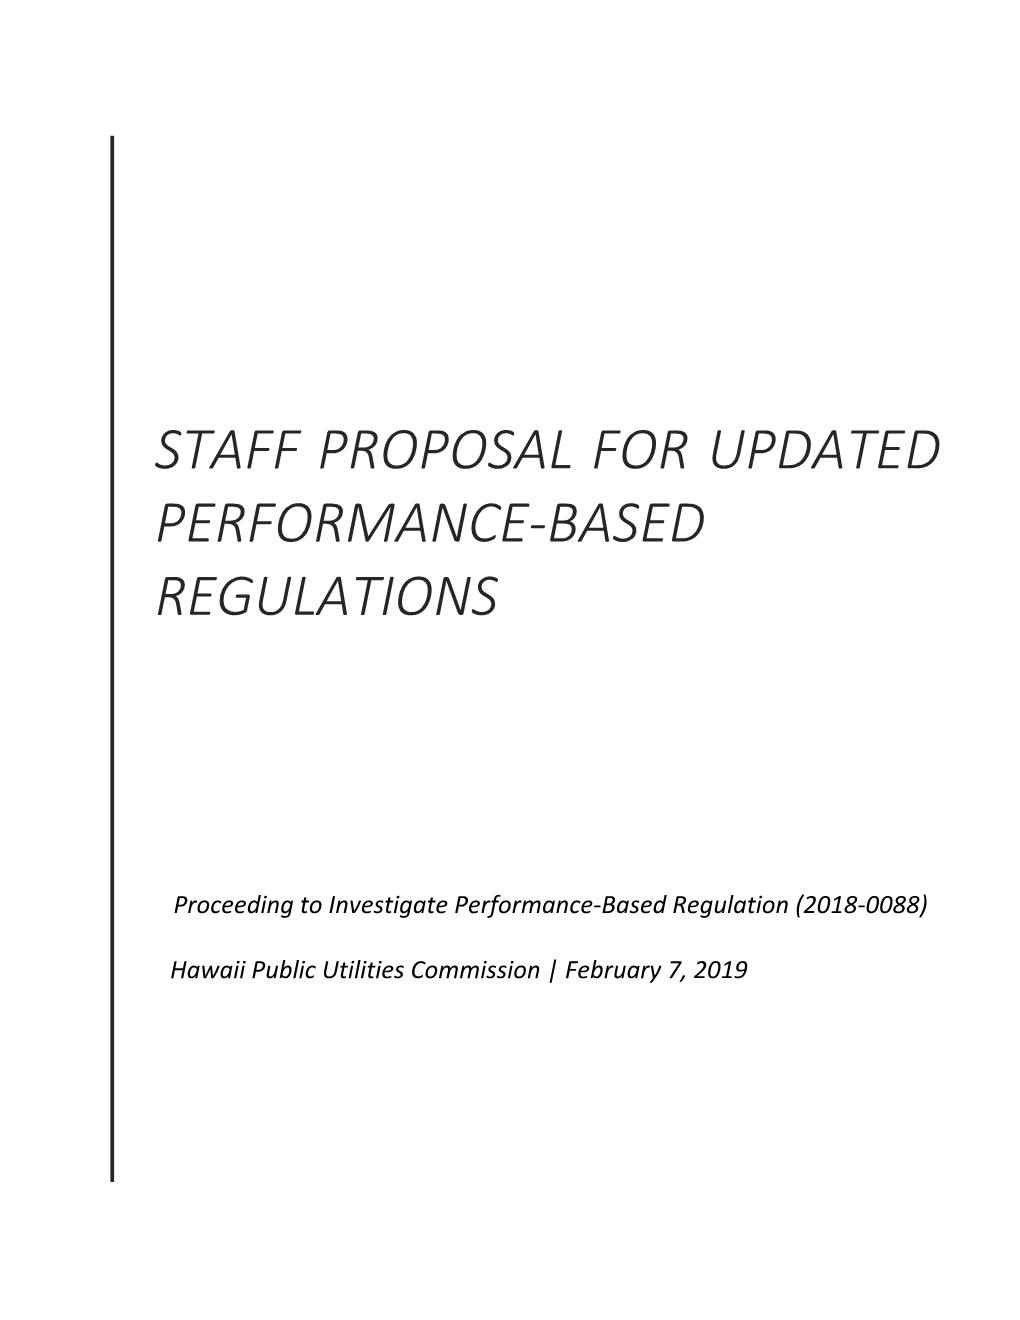 Staff Proposal for Updated Performance-Based Regulations